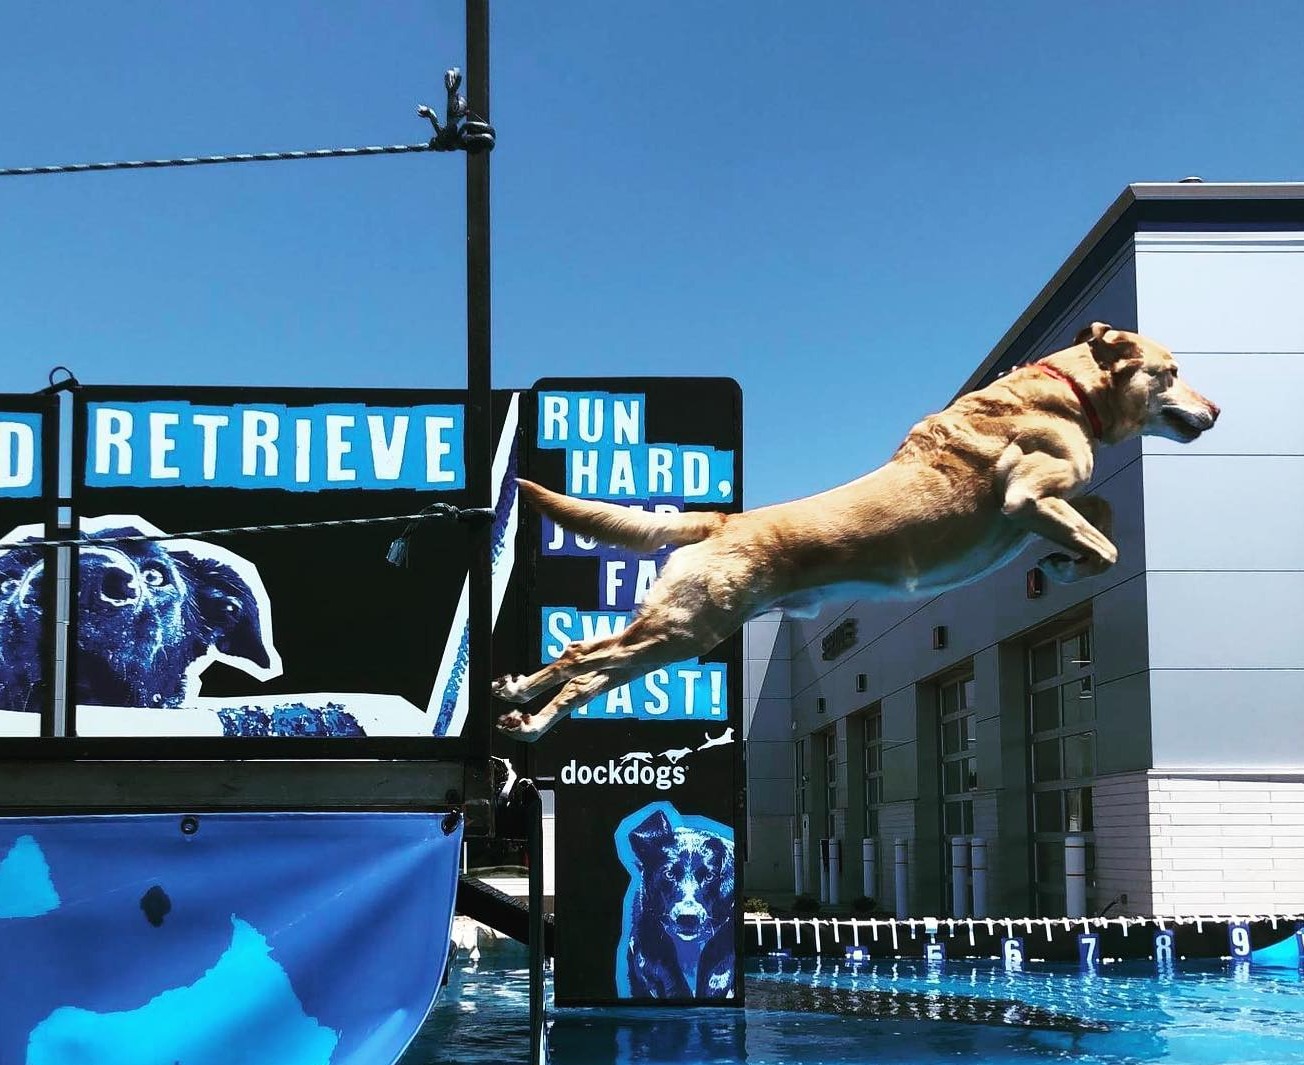 A fit yellow labrador is flying through the air with rippling muscles. His rear paws curl just off the edge of the dock. An advertisement for dock diving is in the background. The side of the dock and the pool are blue.